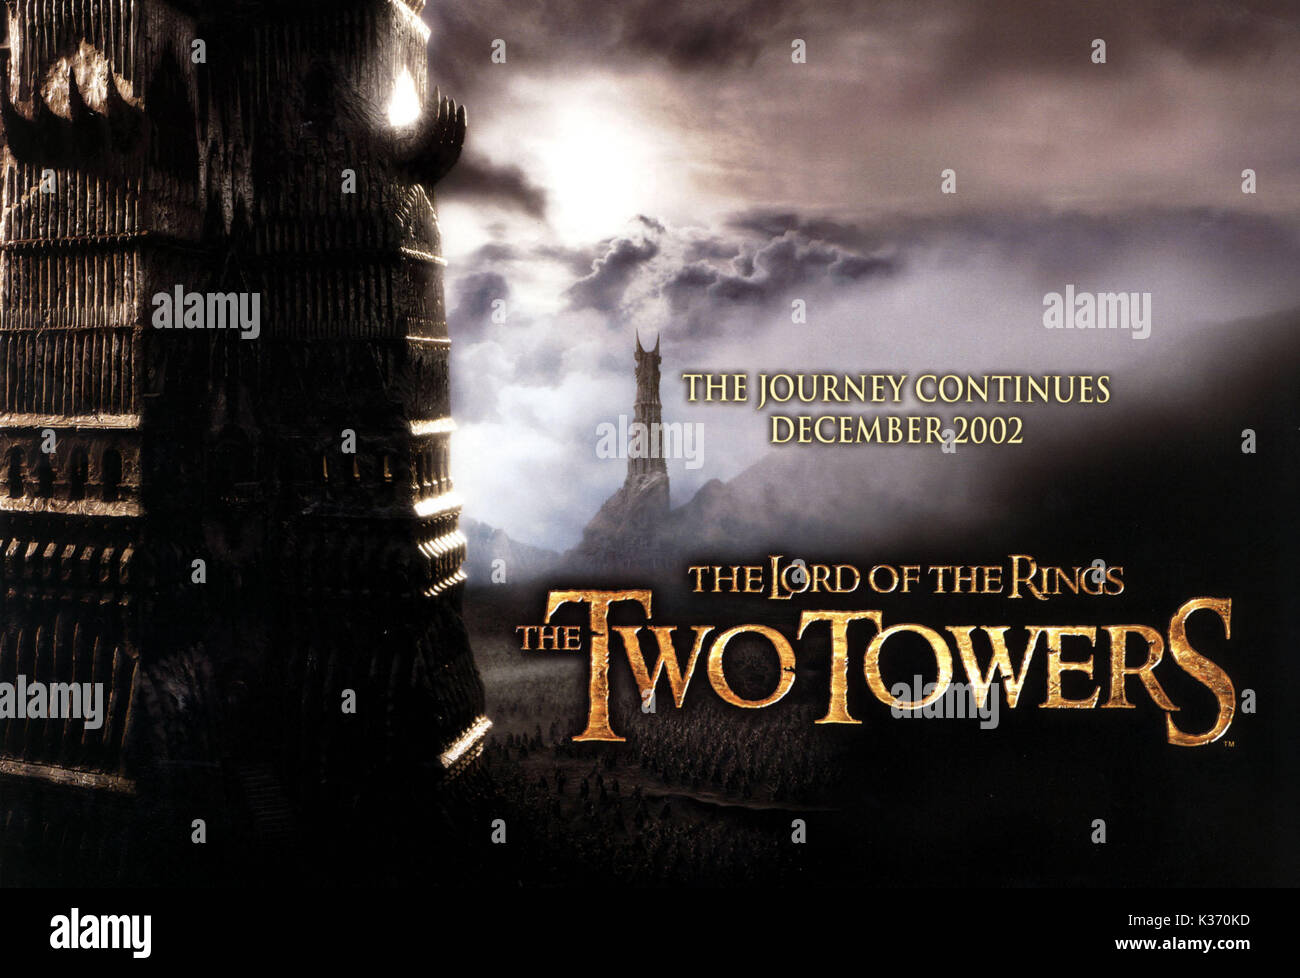 THE LORD OF THE RINGS: THE TWO TOWERS YOU MUST CREDIT: NEW LINE CINEMA  Poster from The Ronald Grant Archive THE LORD OF THE RINGS: THE TWO TOWERS  YOU MUST CREDIT: NEW